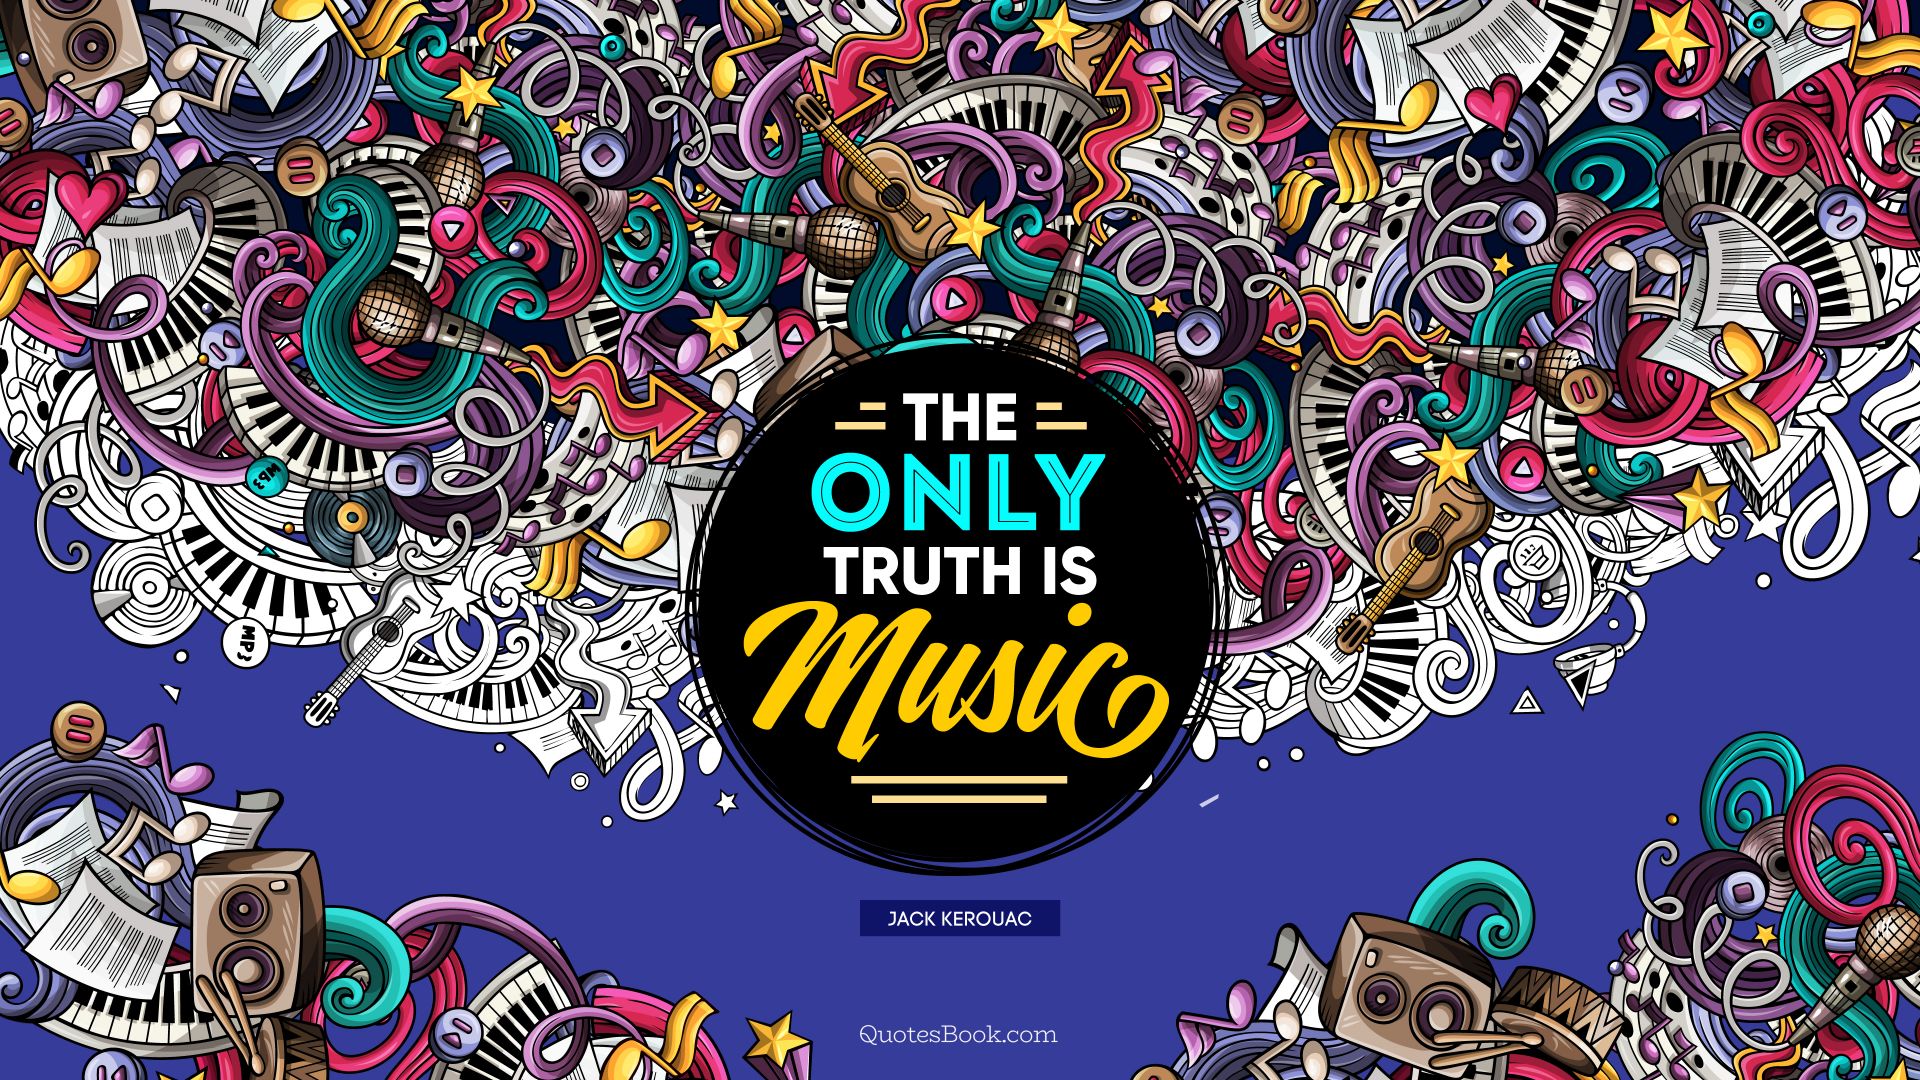 The only truth is music. - Quote by Jack Kerouac